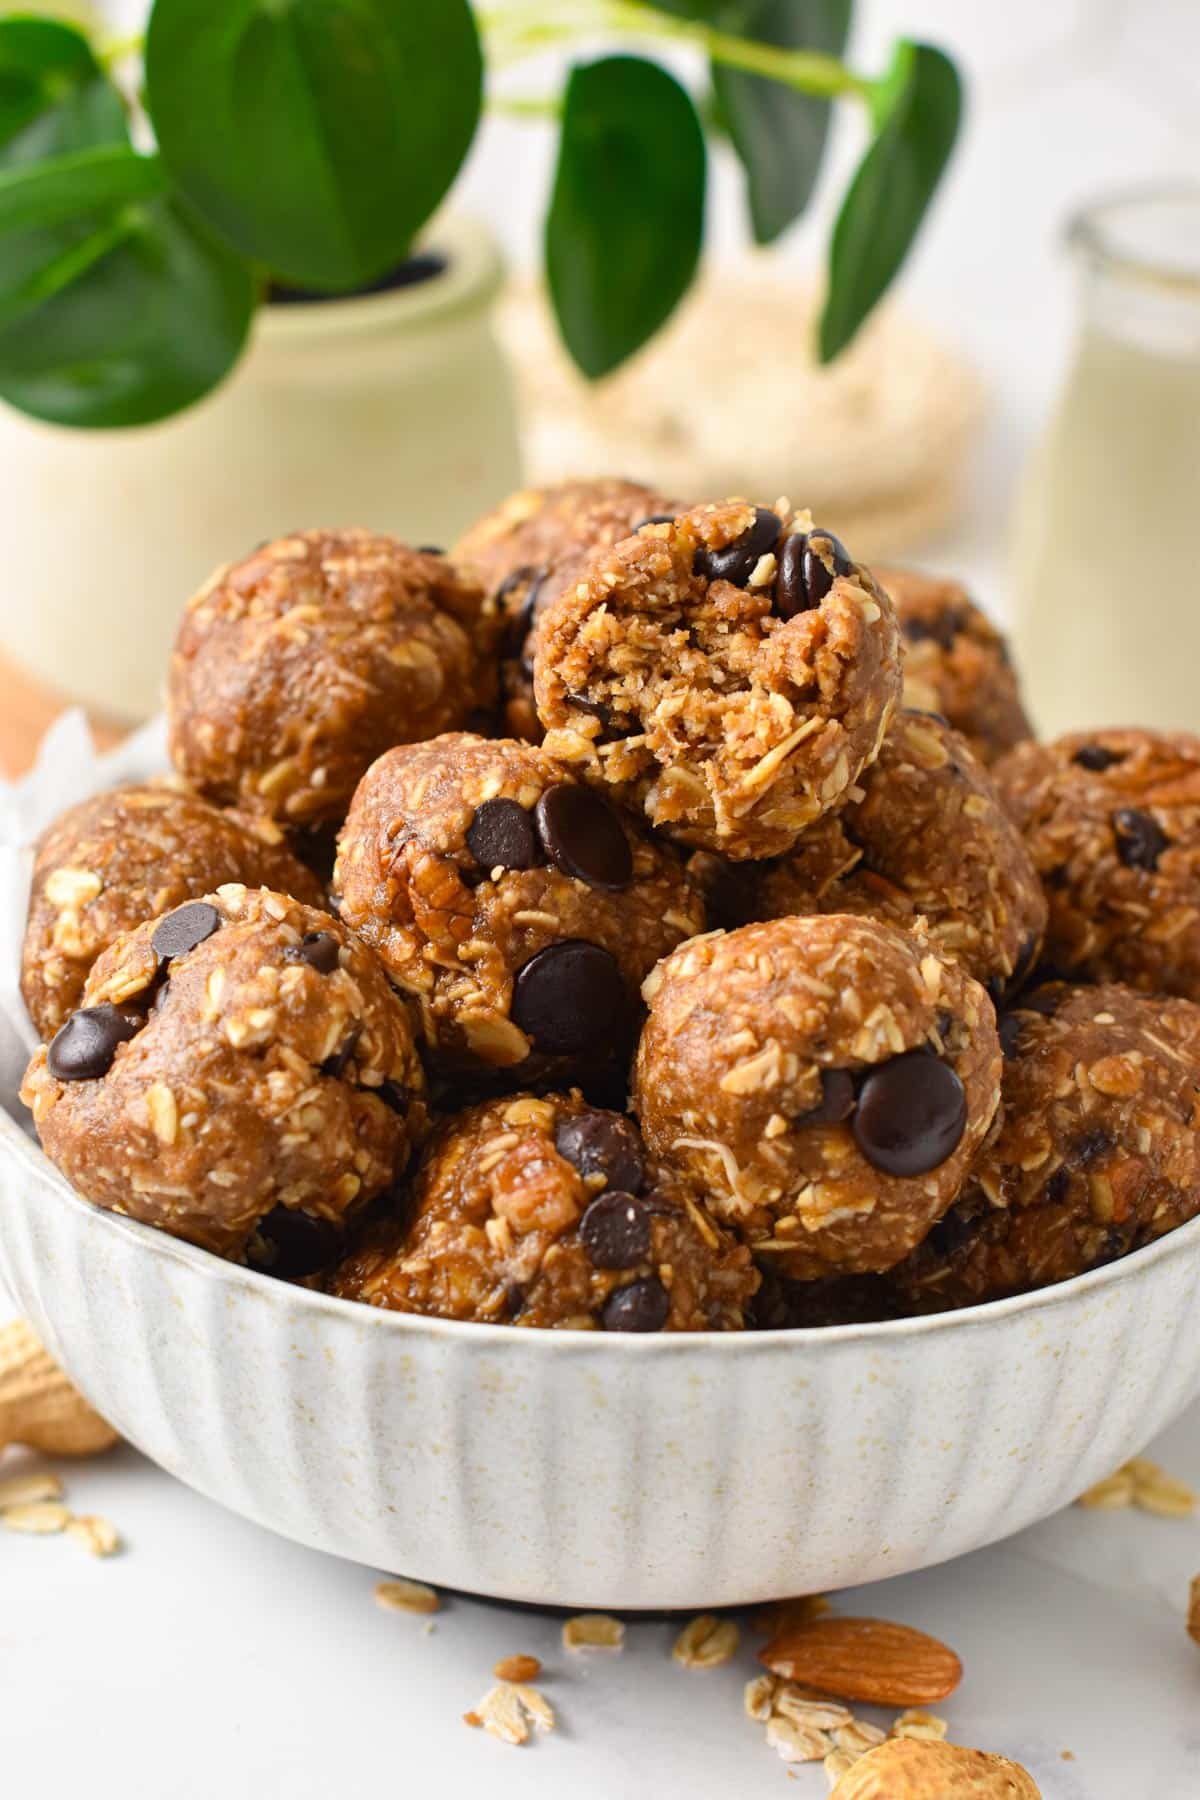 A bowl filled with No Bake Peanut Butter Oatmeal Energy Balls.